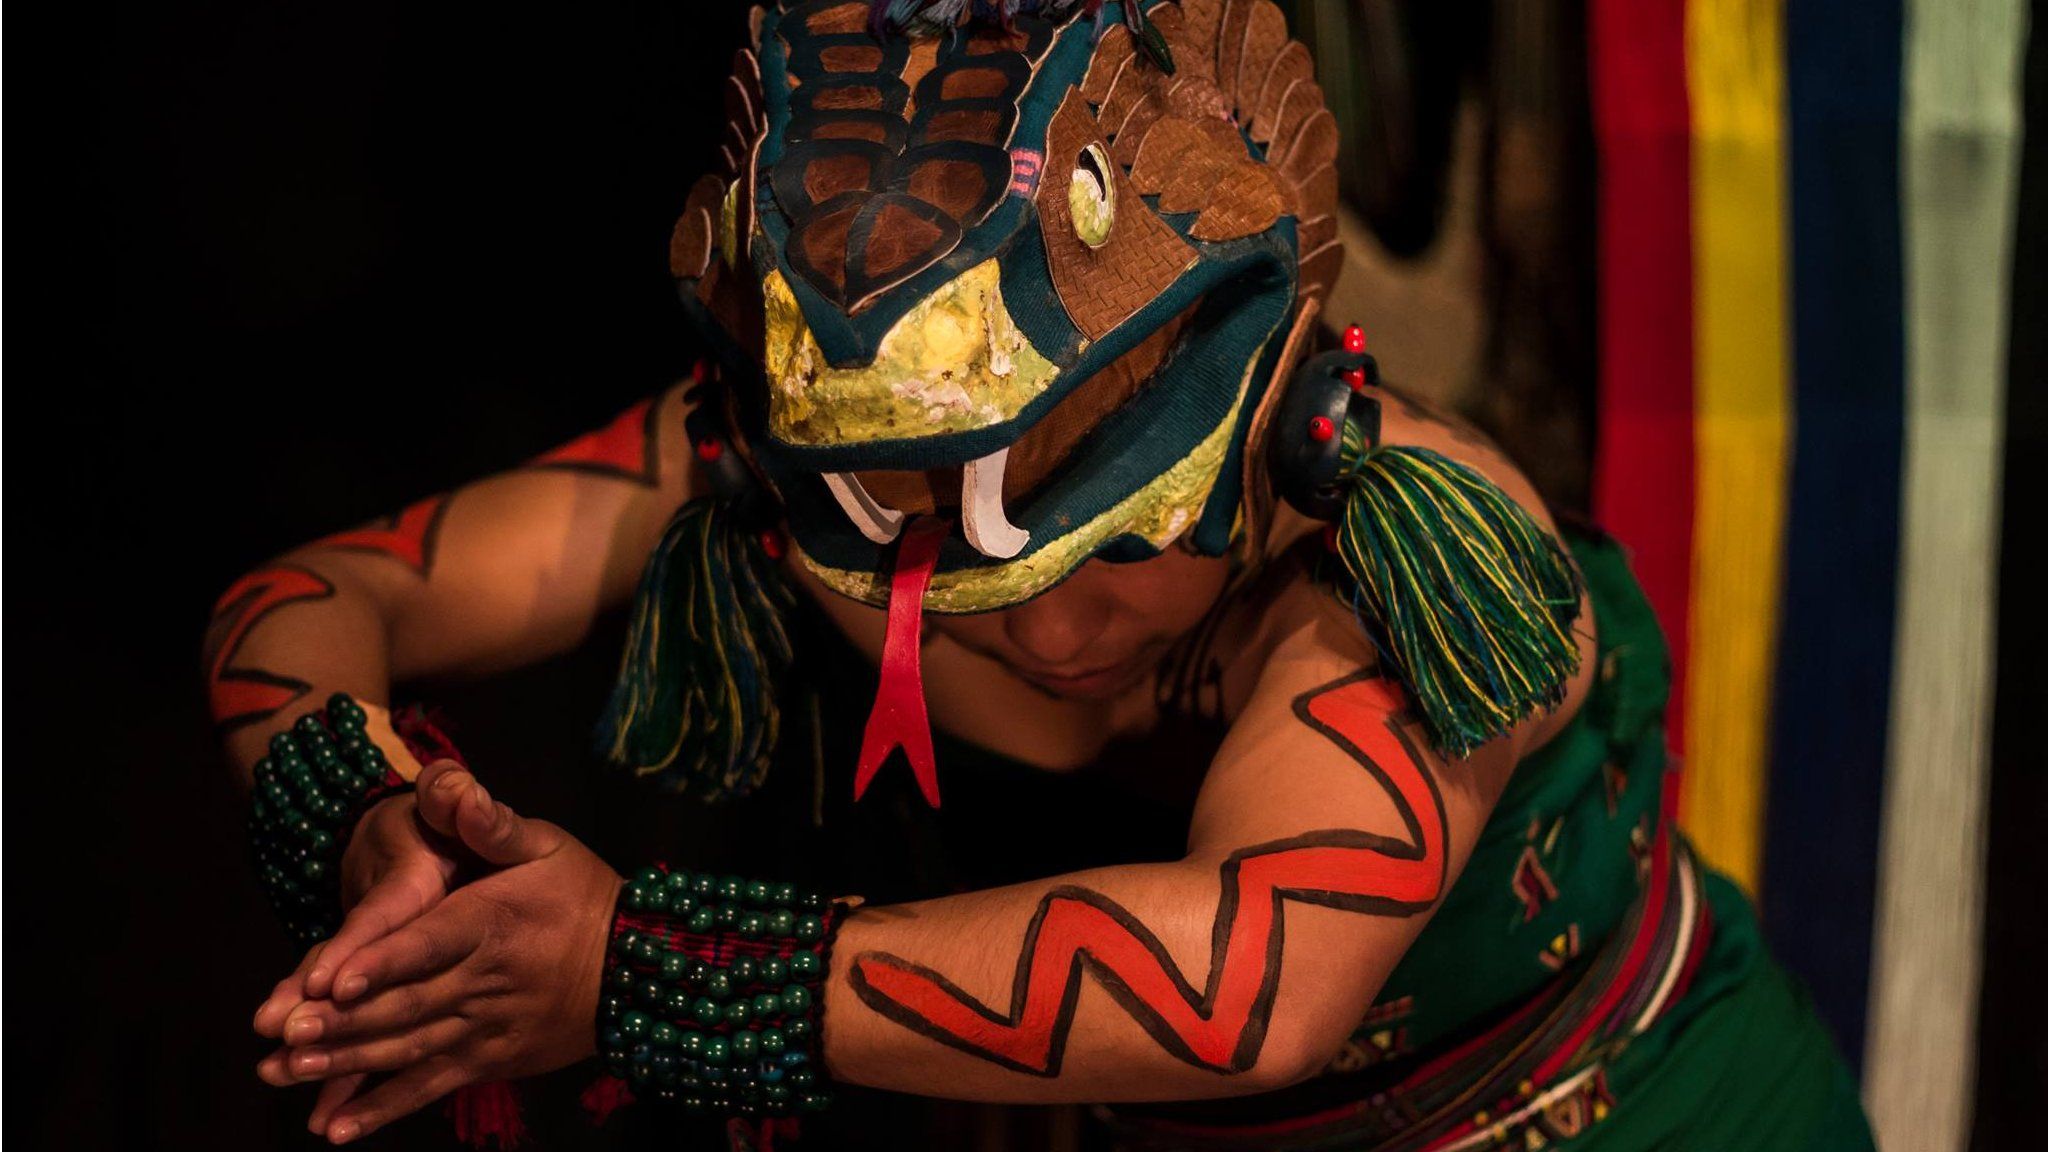 Photo from a play by Mujeres Ajchowa